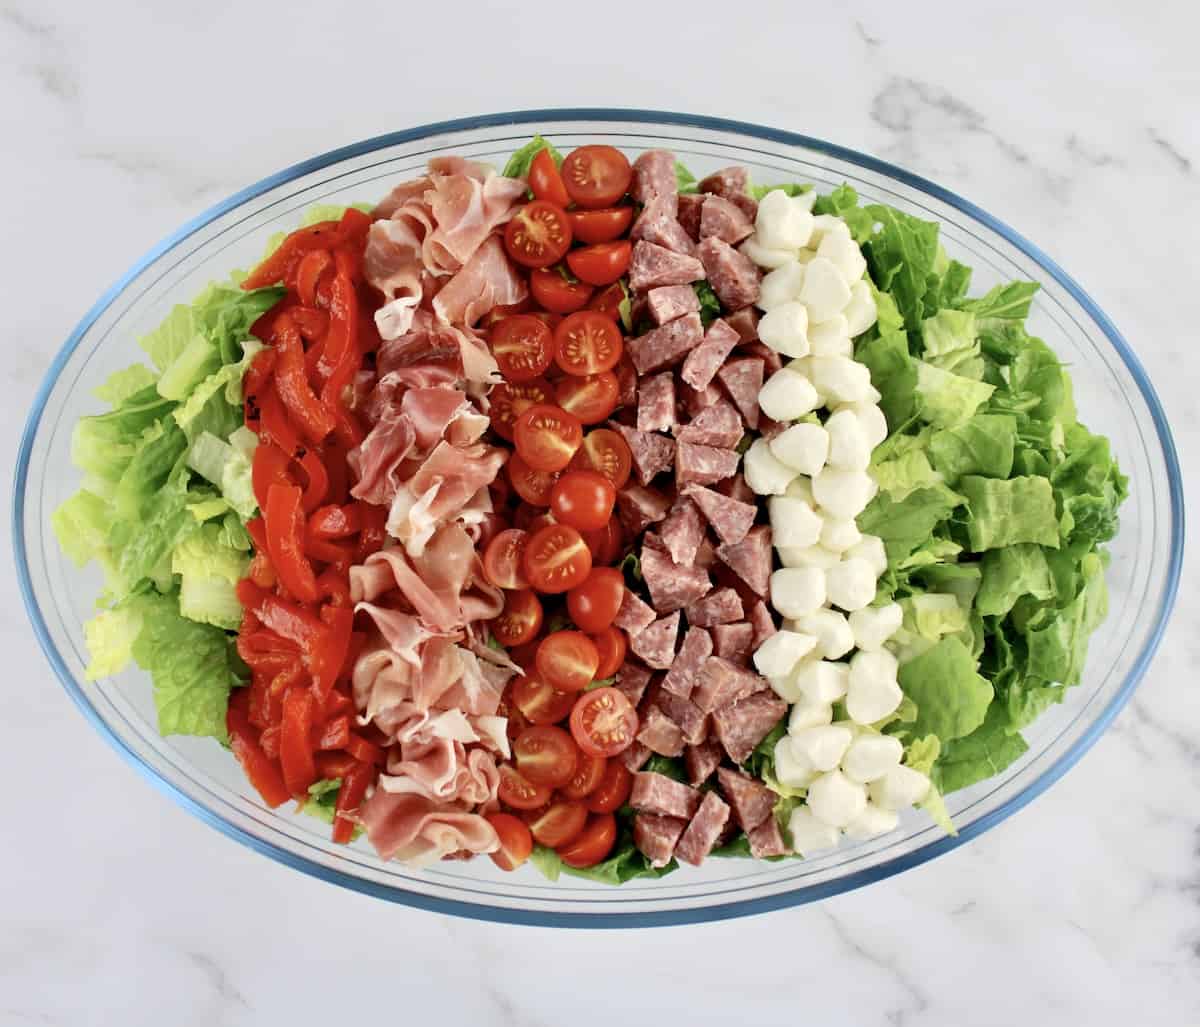 romaine lettuce in oval glass bowl with rows of prosciutto roasted rd pepper strips halved tomatoes mozzarella pearls and chopped soppressata